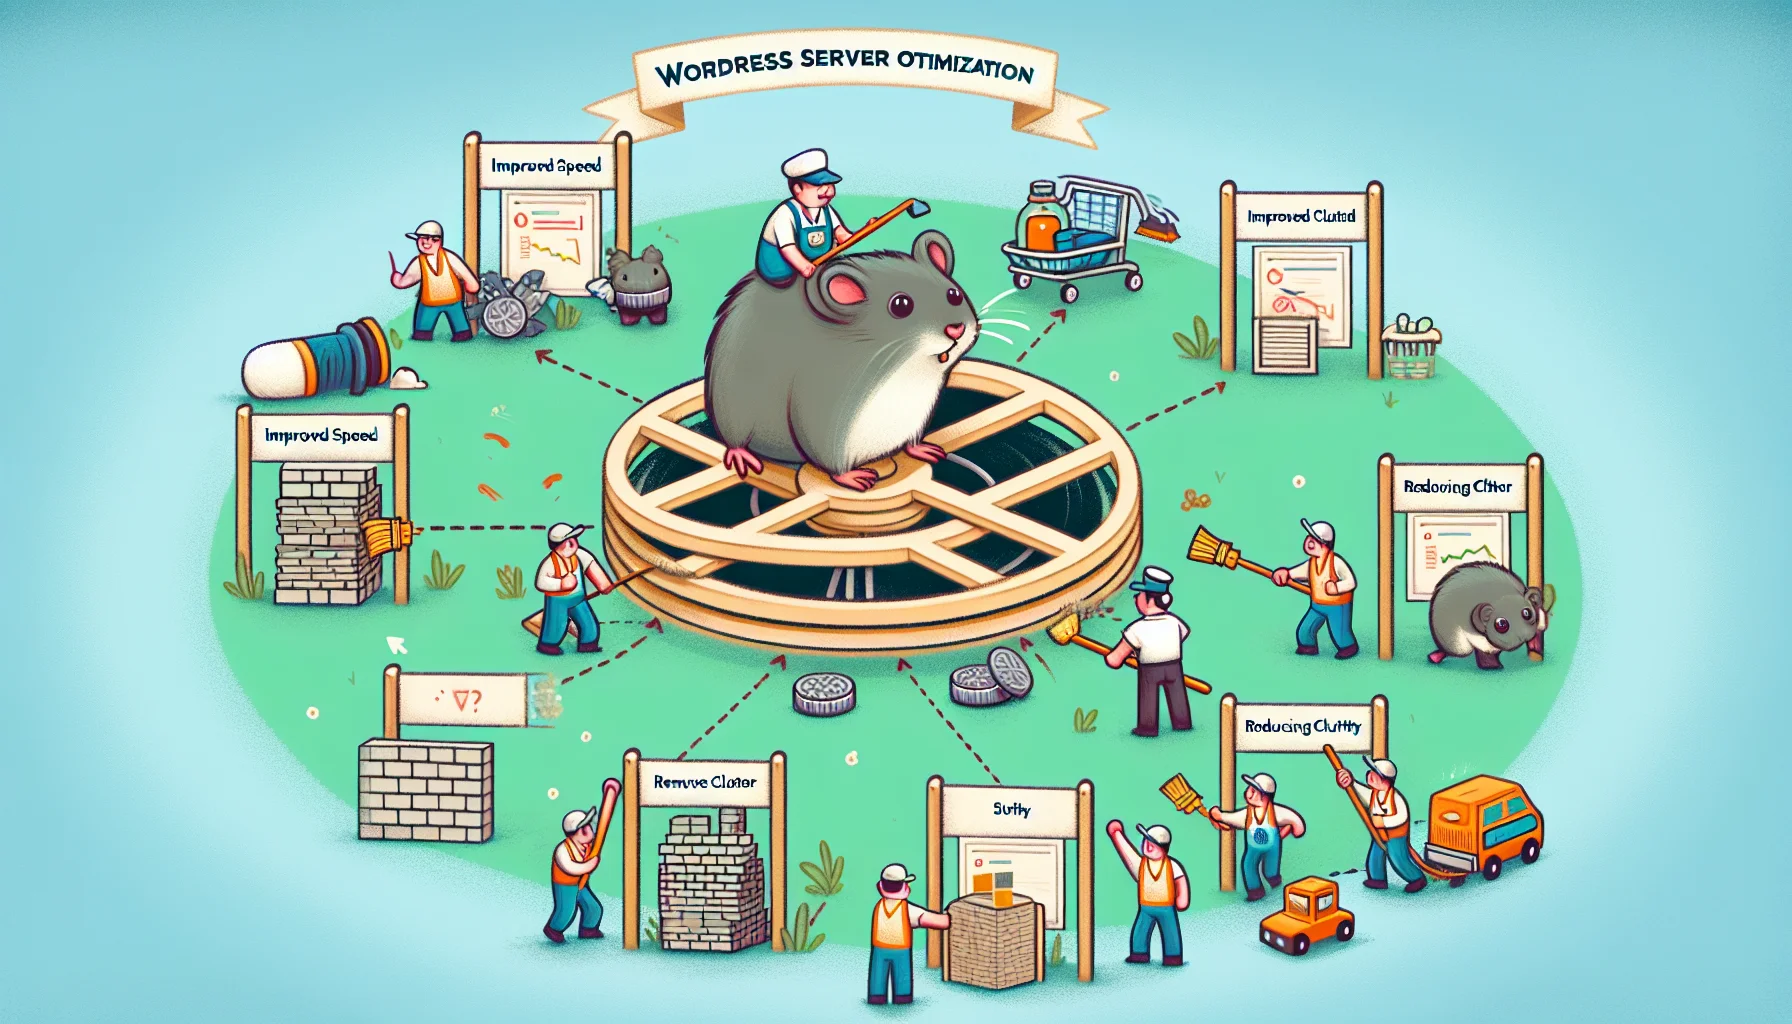 Illustrate a humorous scenario related to WordPress hosting server optimization. The image should feature nine distinct sections, each representing an individual method for optimization. Some potential ideas could include a hamster on a wheel to symbolize improved speed, a janitor with a broom sweeping away unwanted data to represent reducing clutter, or a group of miniature construction workers constructing a brick wall to signify the enhancement of security features. The overall scene should be playful, yet informative, and encourage the viewer to think about the importance of web hosting.